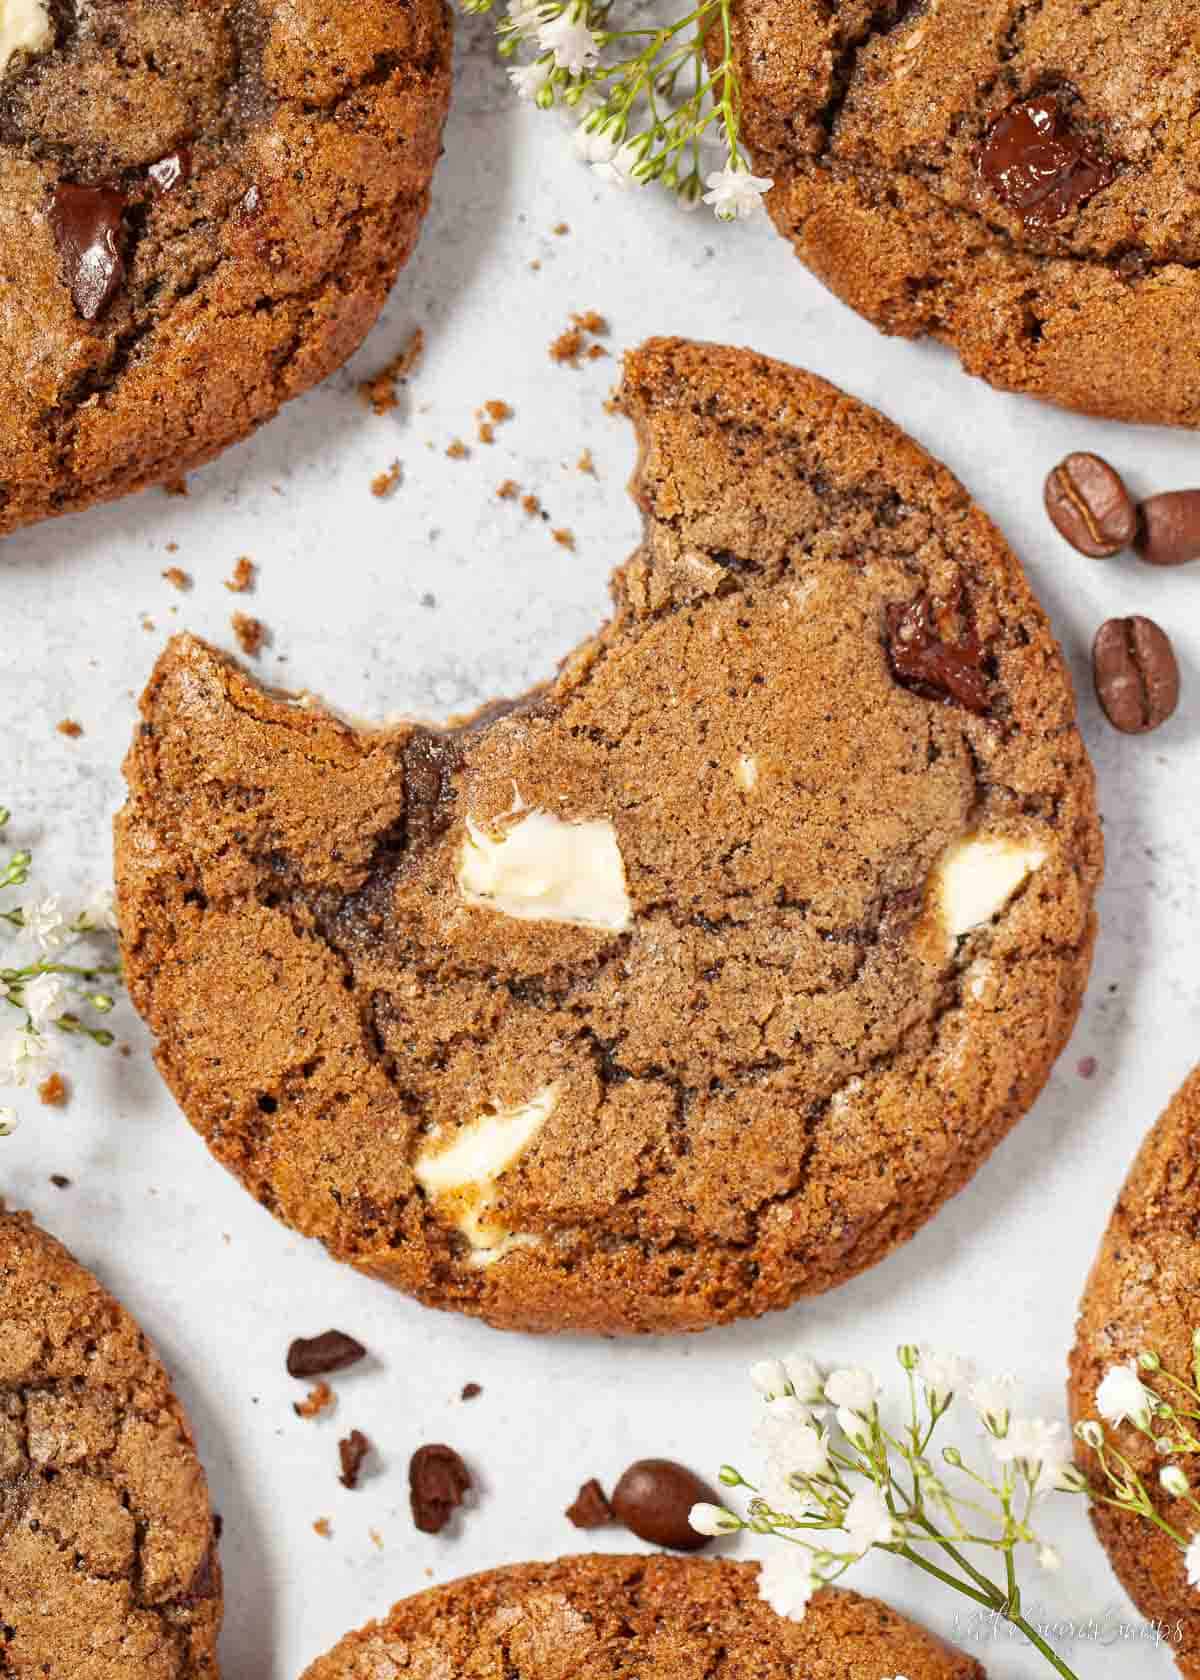 Chocolate chip coffee cookies on a worktop and one has a bite taken from it.